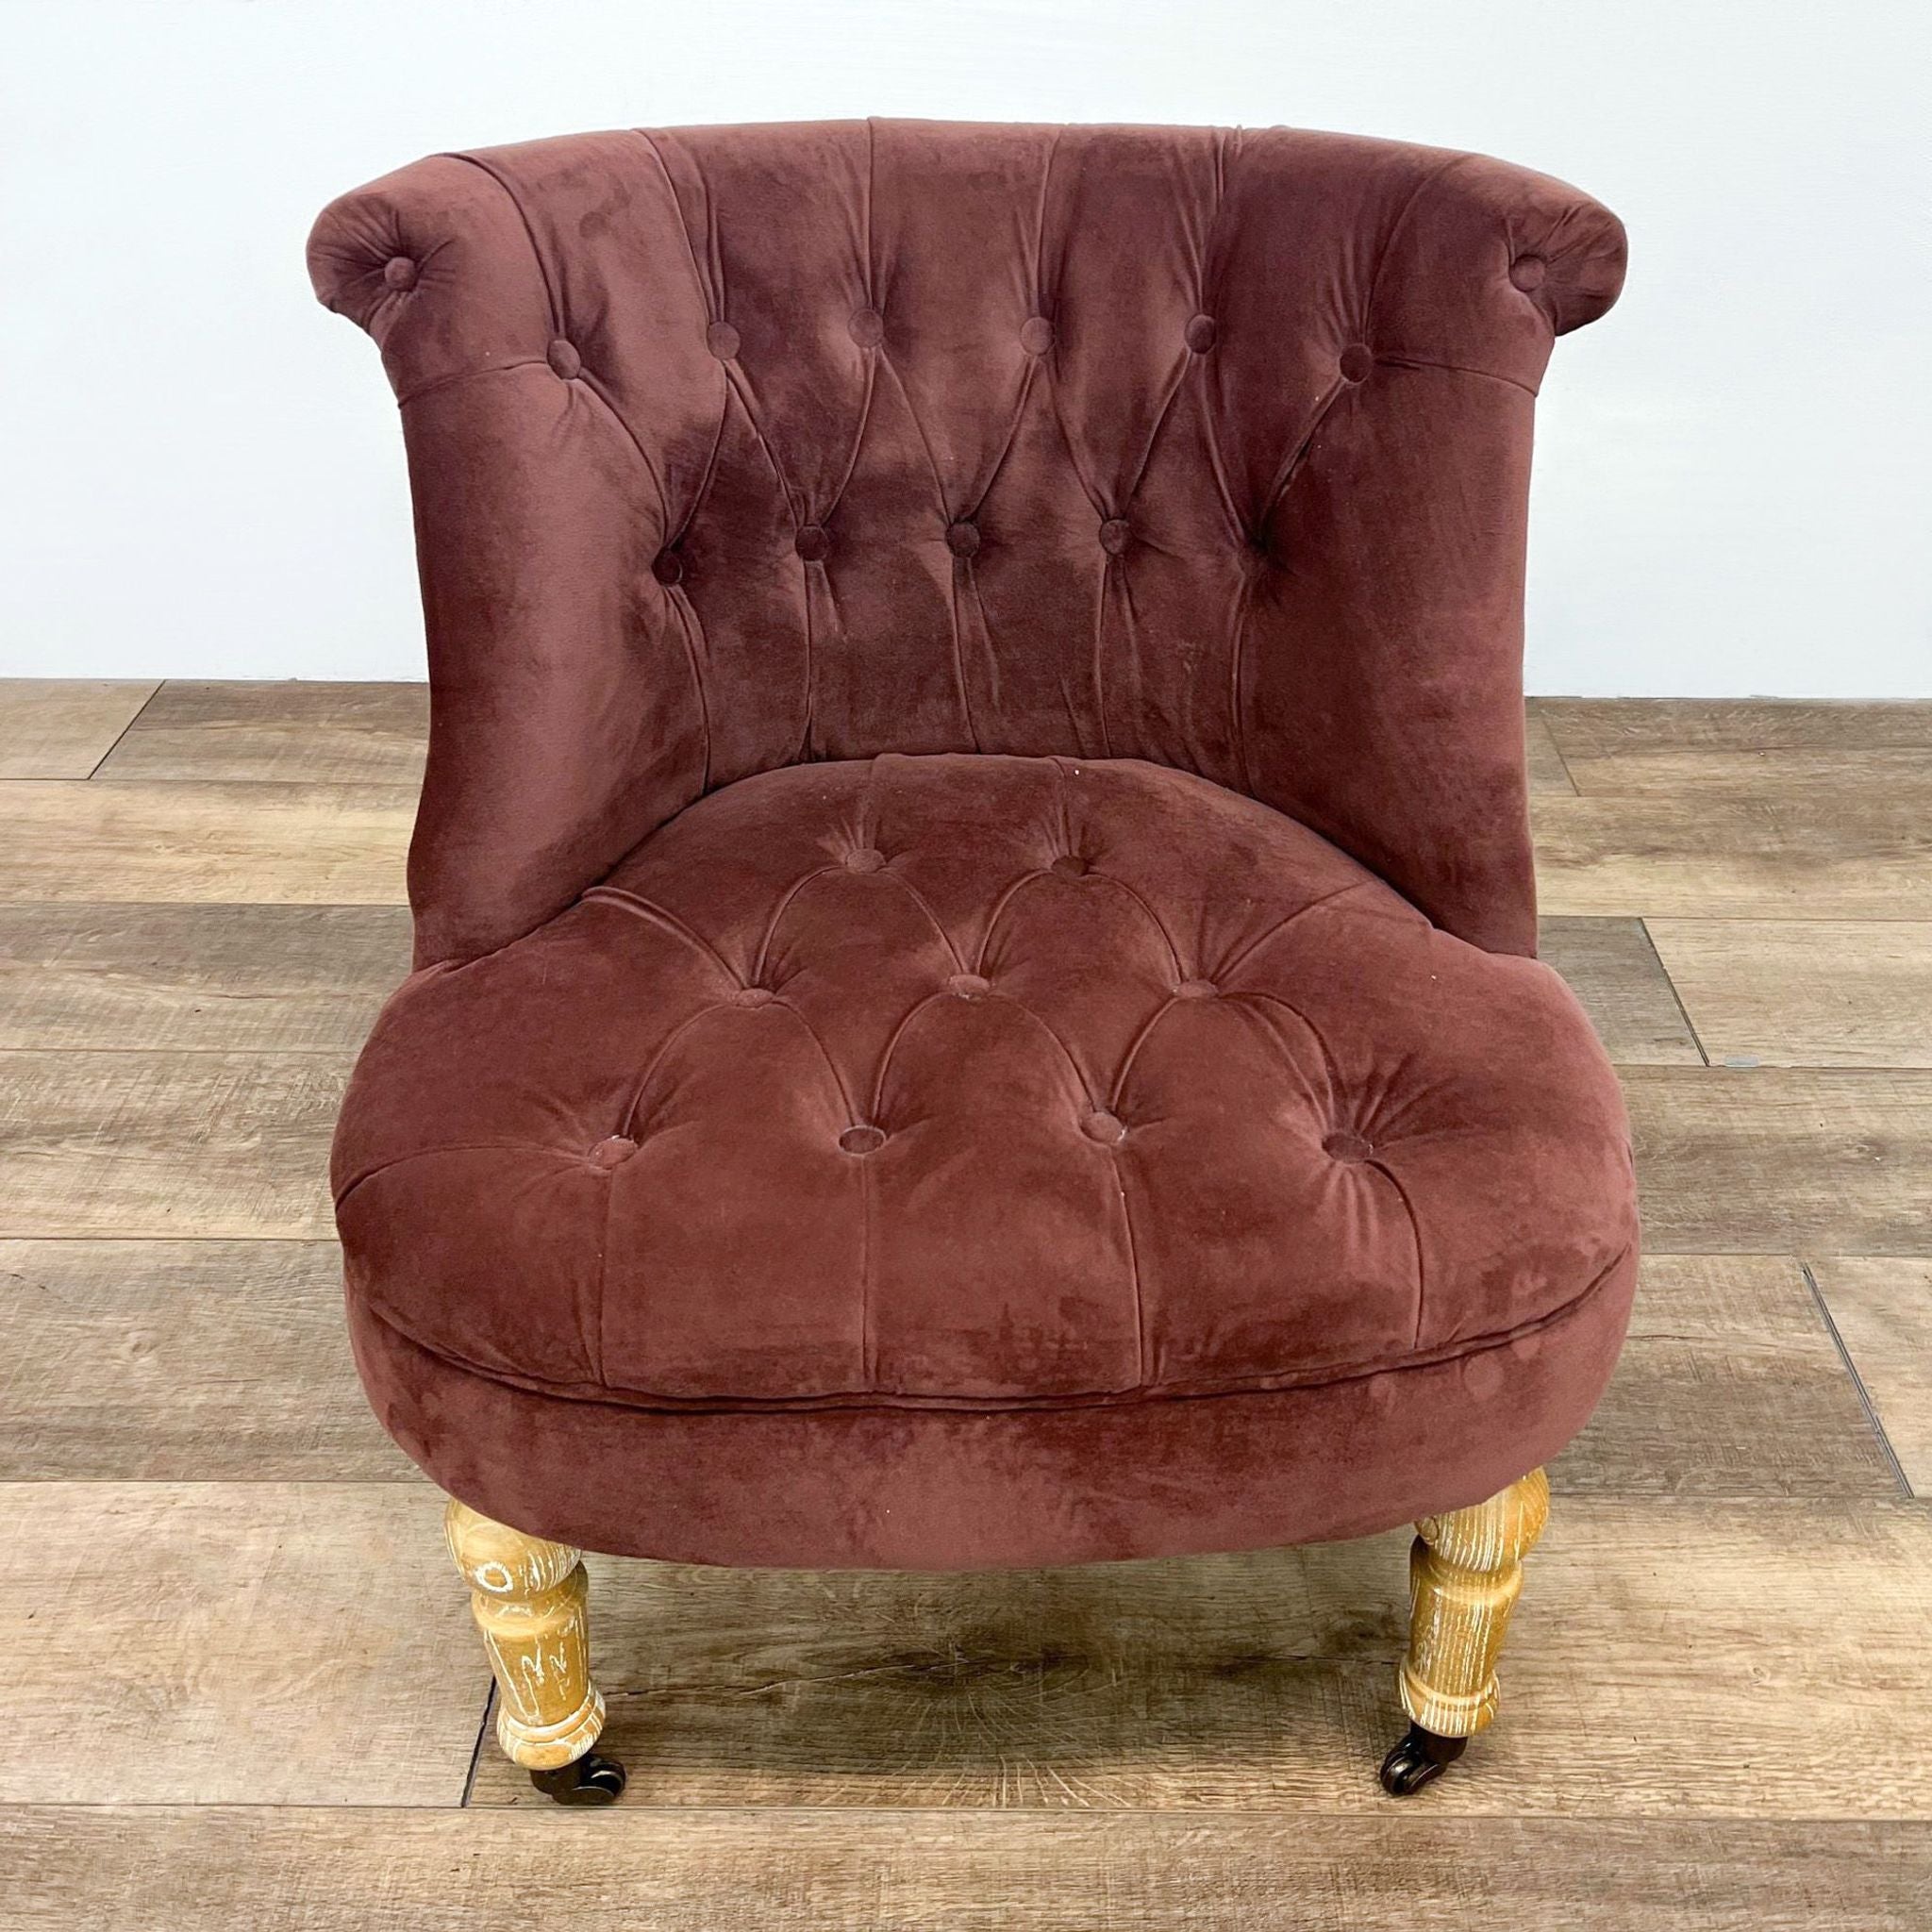 Cost Plus tufted velvet accent chair with curved back and wood legs with casters, in a lounge setting.